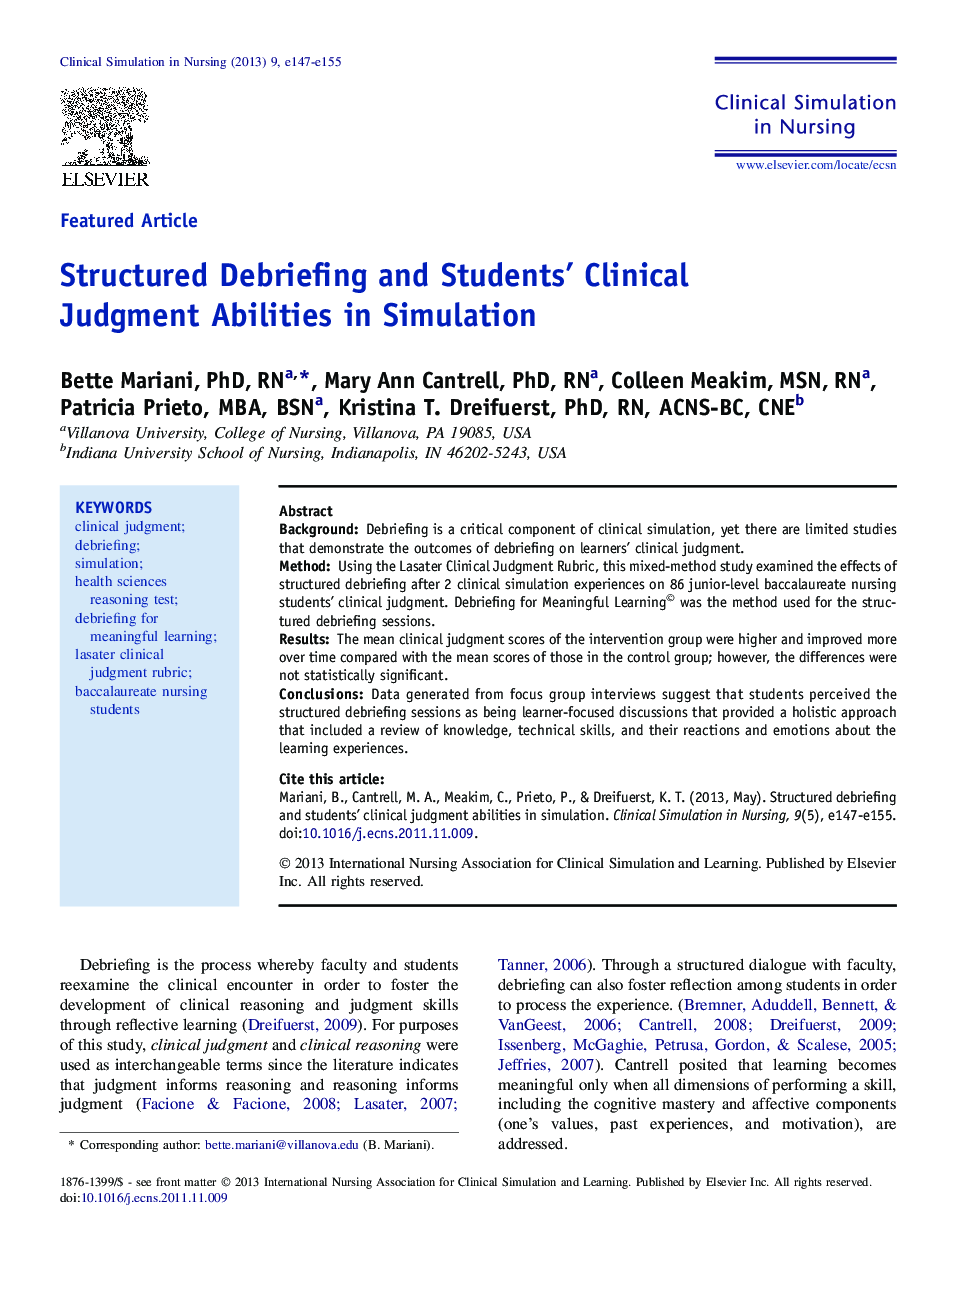 Structured Debriefing and Students' Clinical Judgment Abilities in Simulation